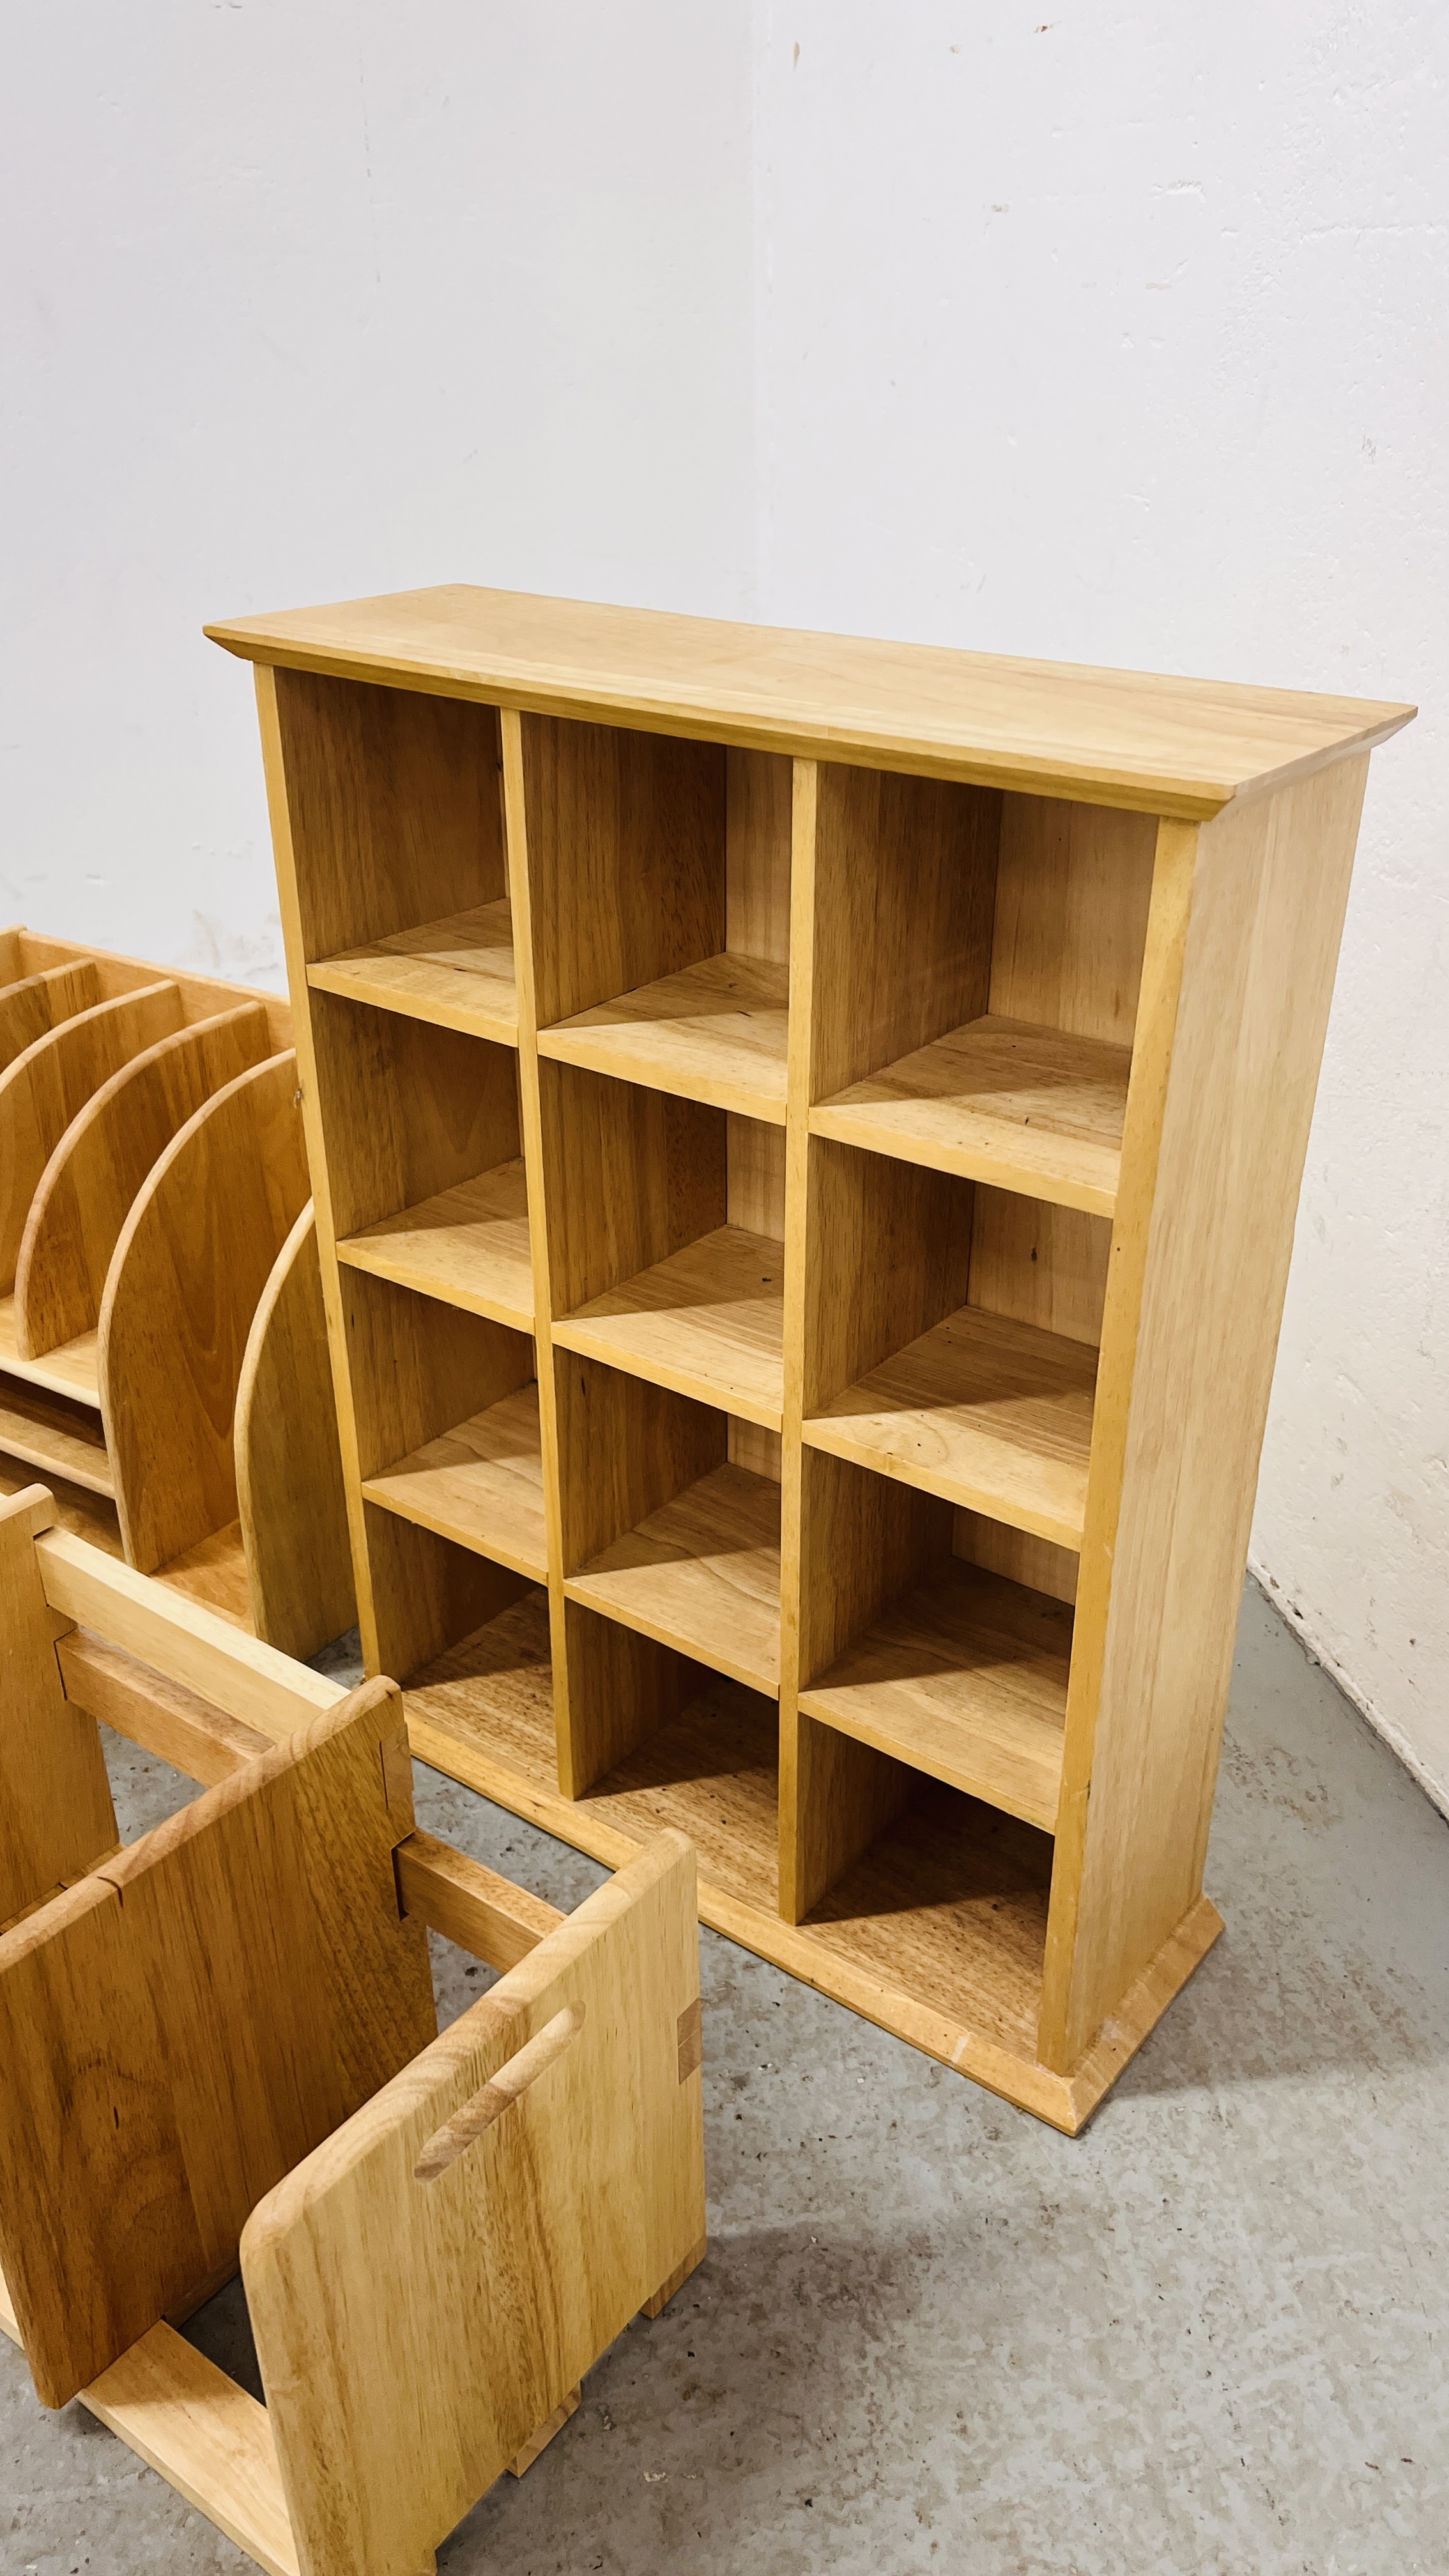 A BEECHWOOD DESK TIDY ALONG WITH EXTENDING BOOK RACK AND 12 PIGEON HOLE SHELVING RACK. - Image 3 of 4